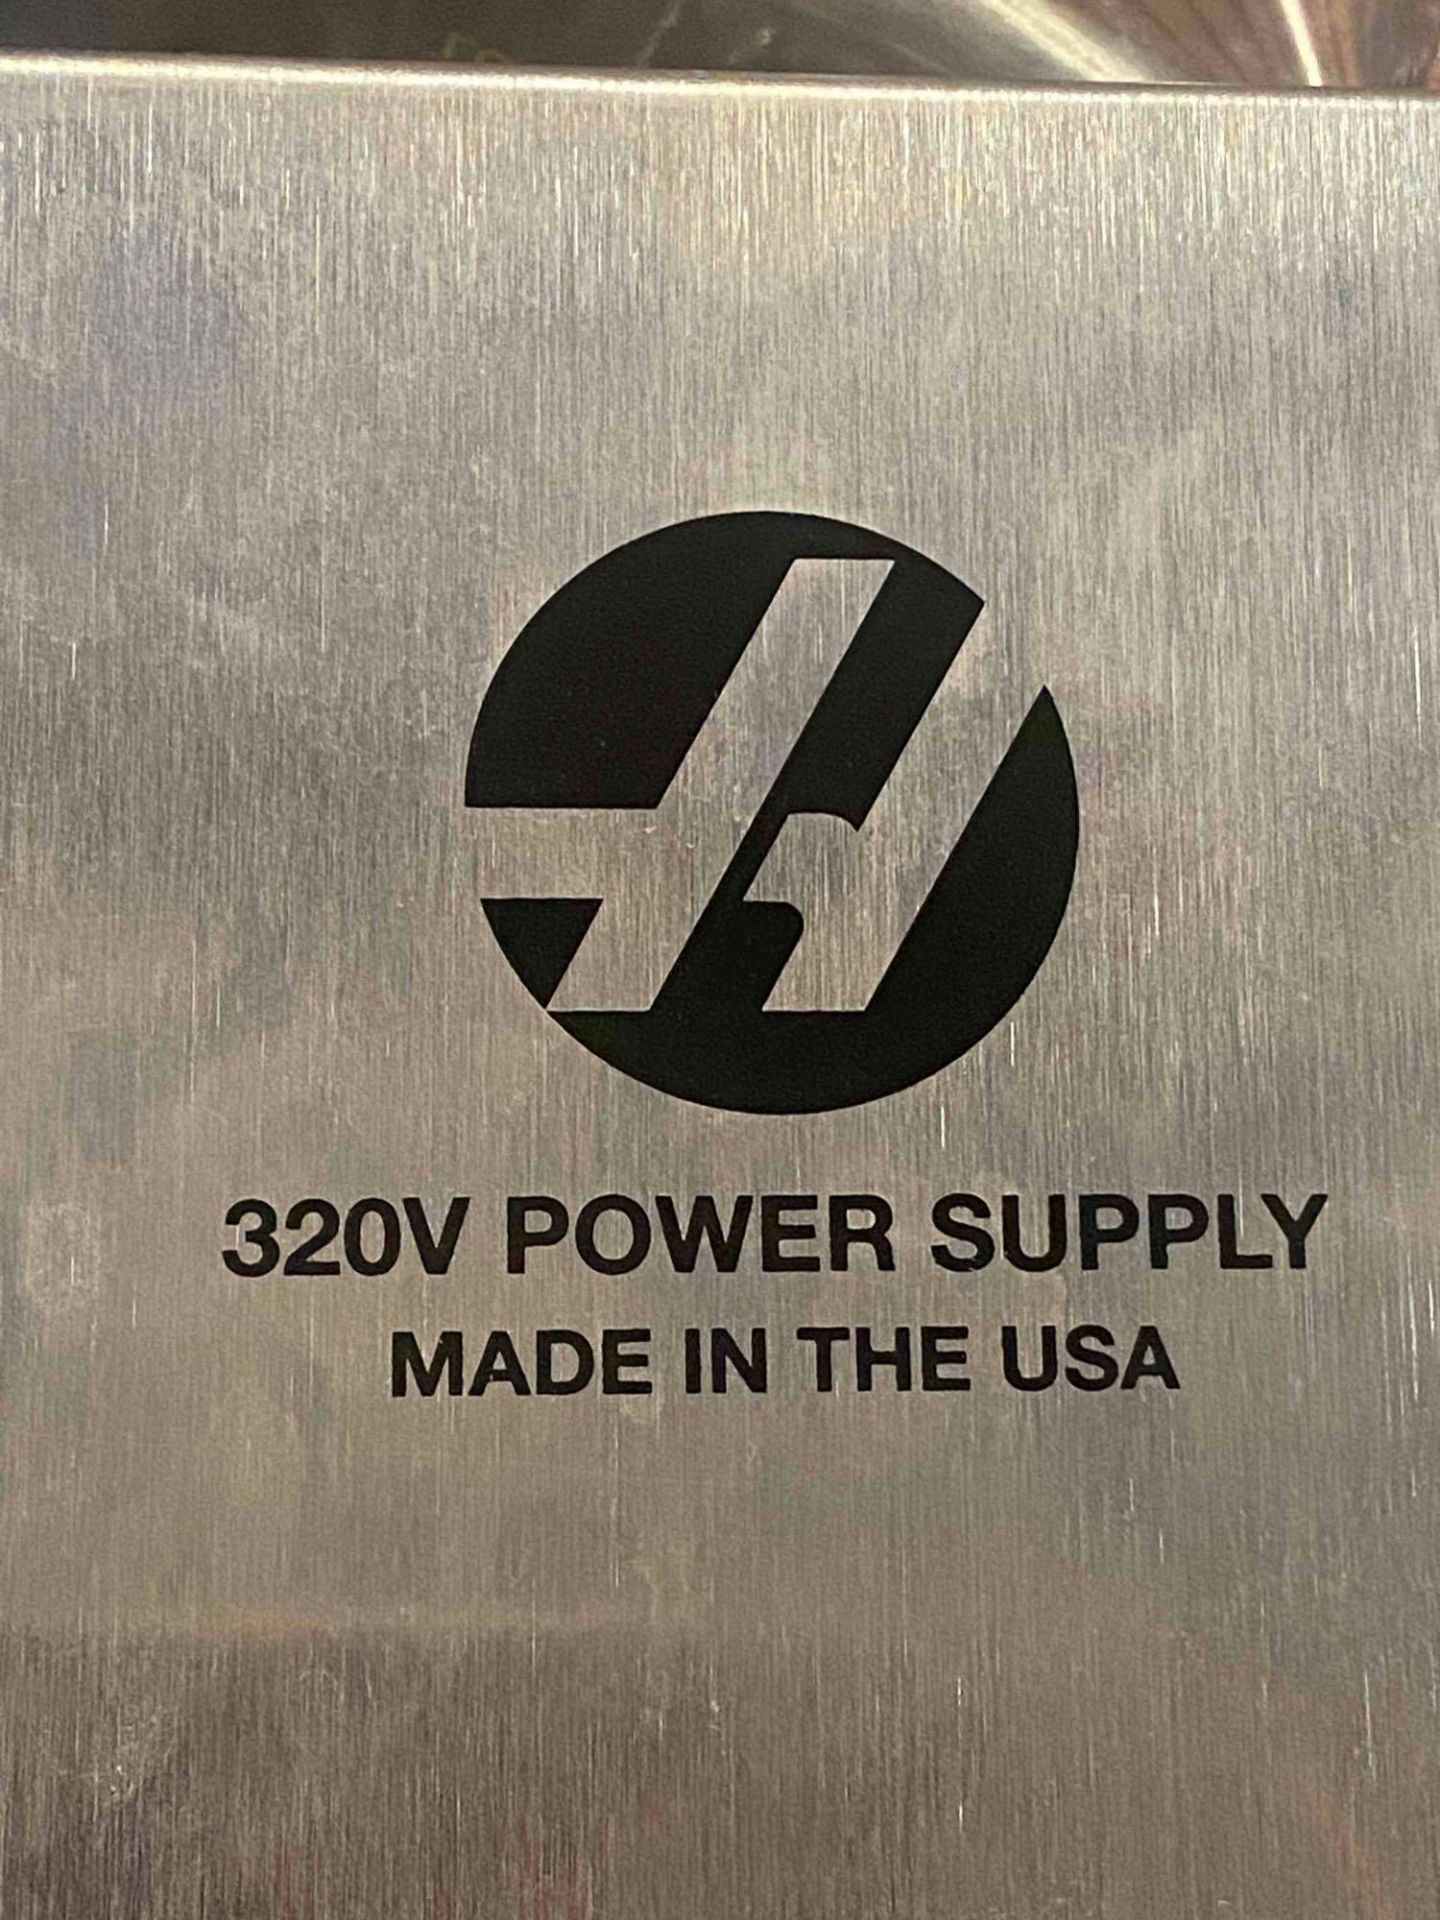 HAAS Power Supply - Image 4 of 4